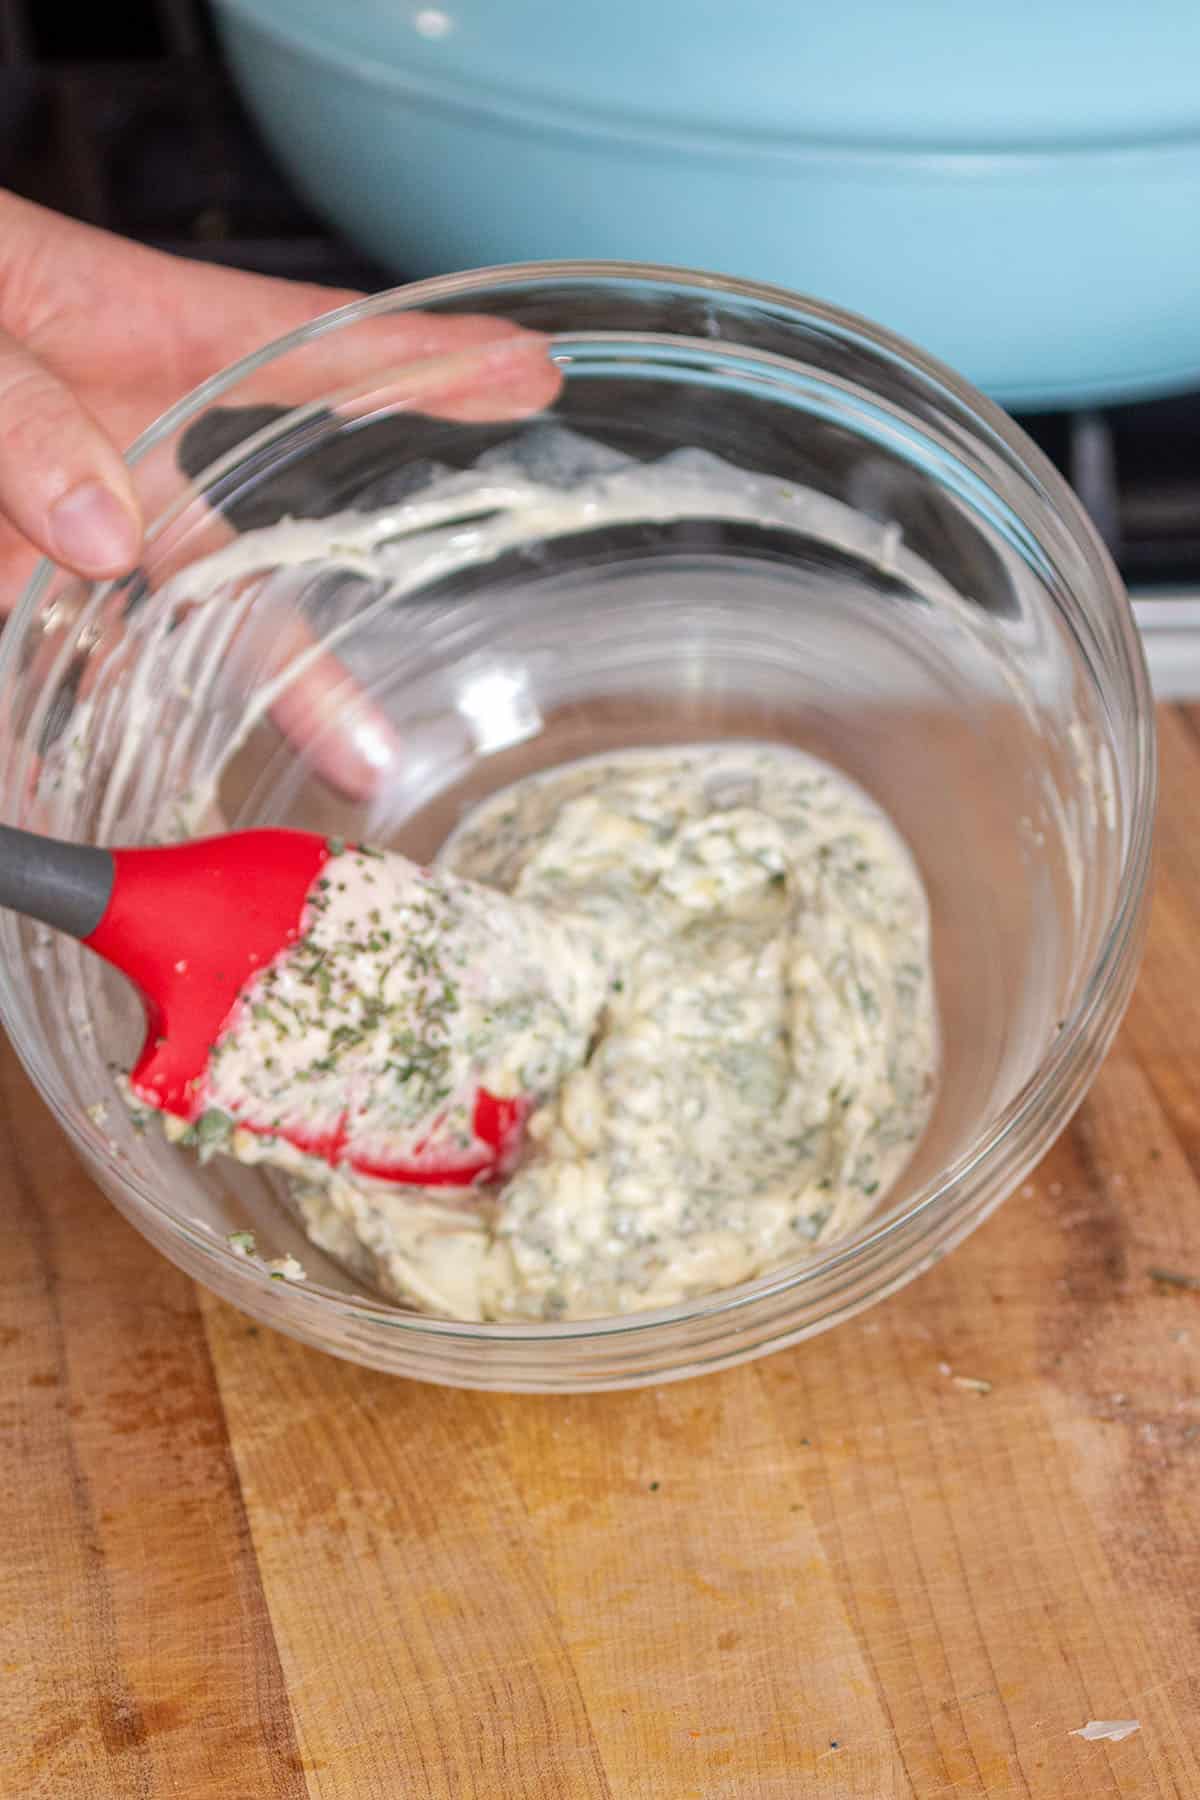 Mixing bowl with a spatula creaming together butter and herb mix.